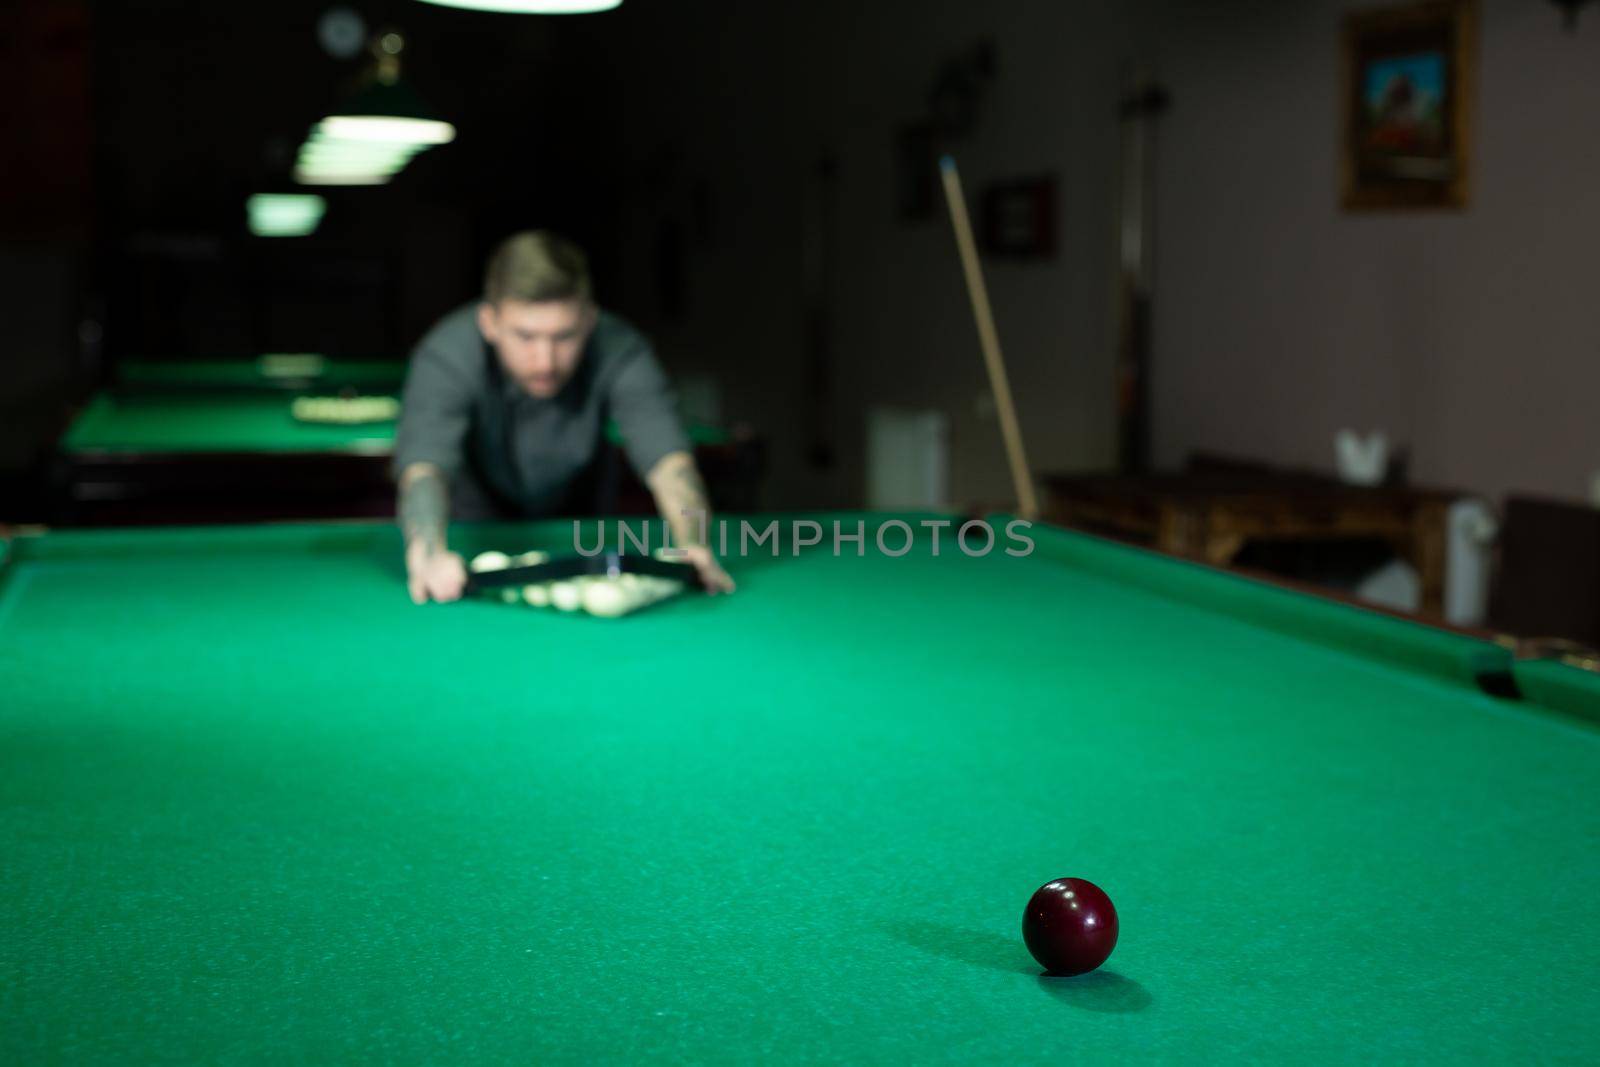 Game of billiards. The man puts the balls on the green billiard table.